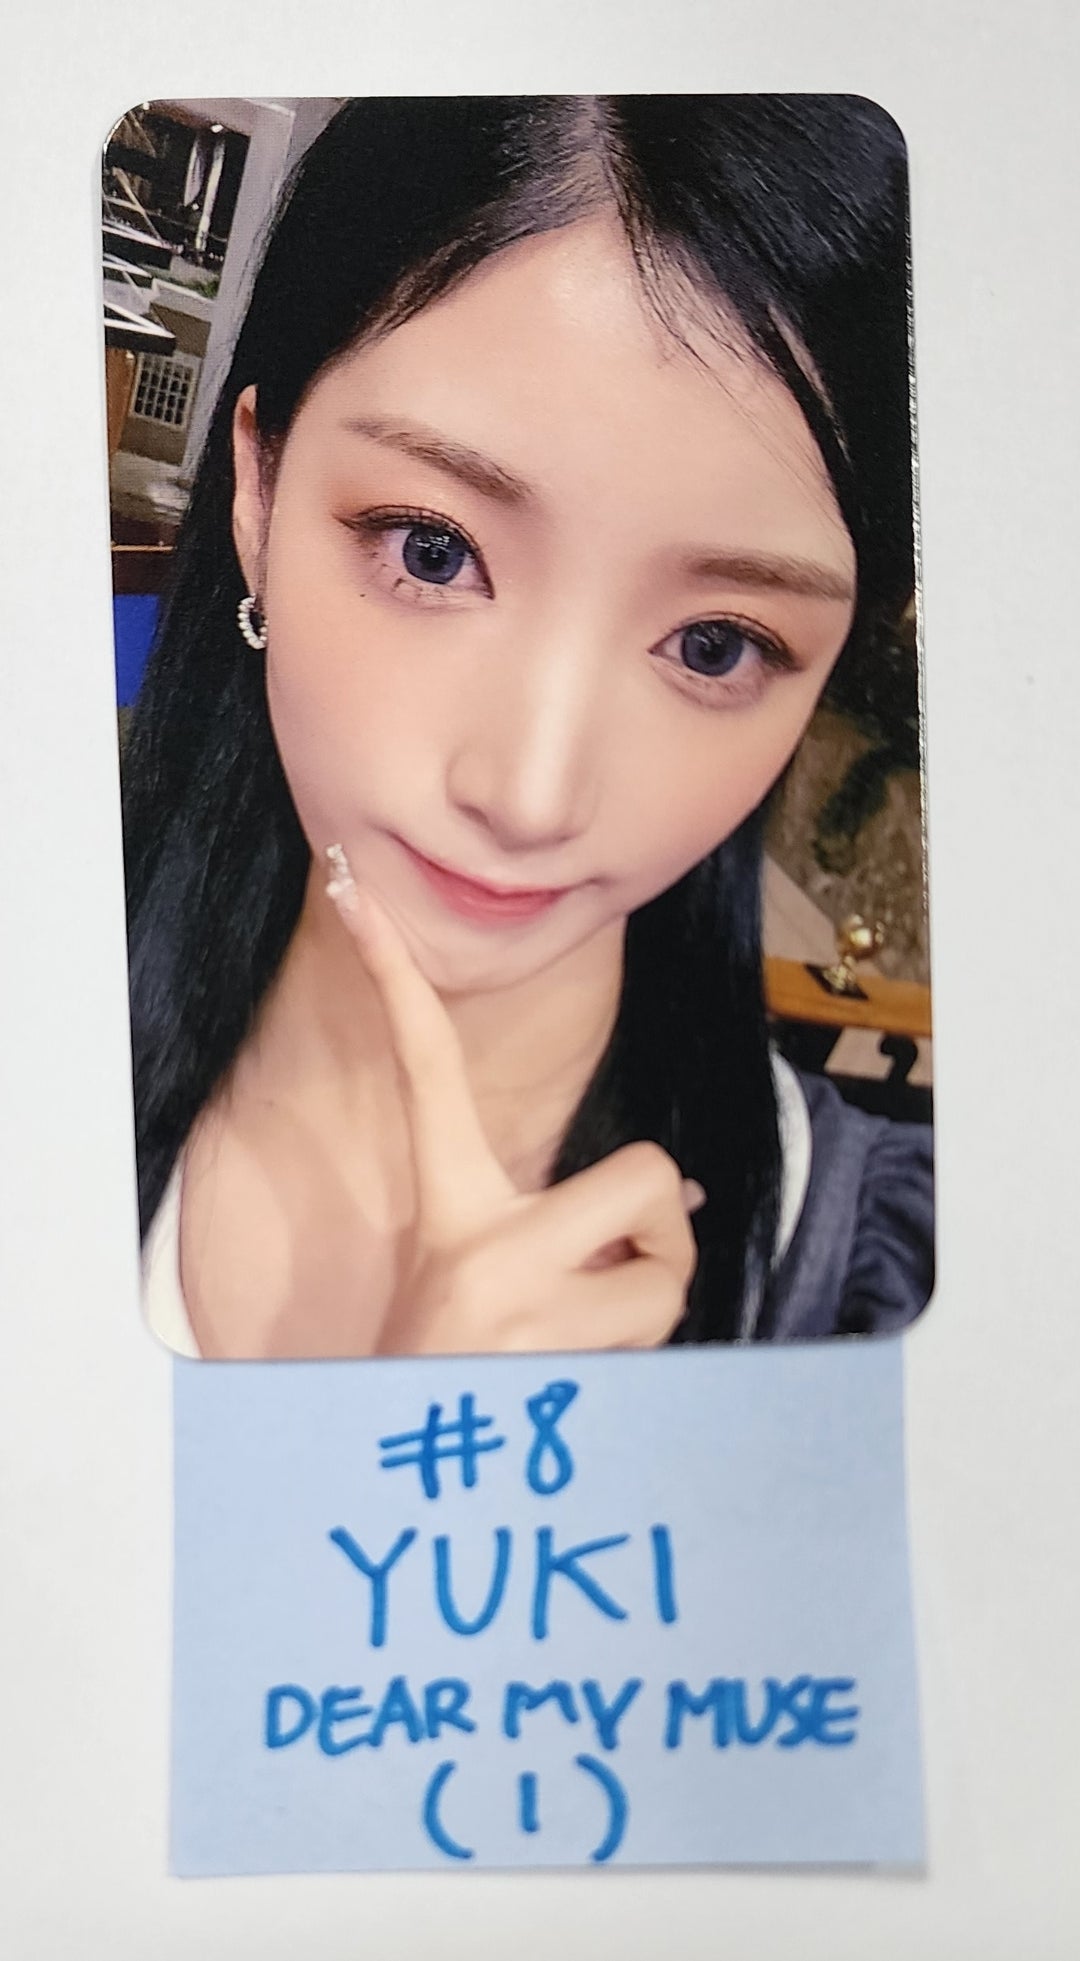 PURPLE KISS "Cabin Fever" - Dear My Muse Fansign Event Photocard